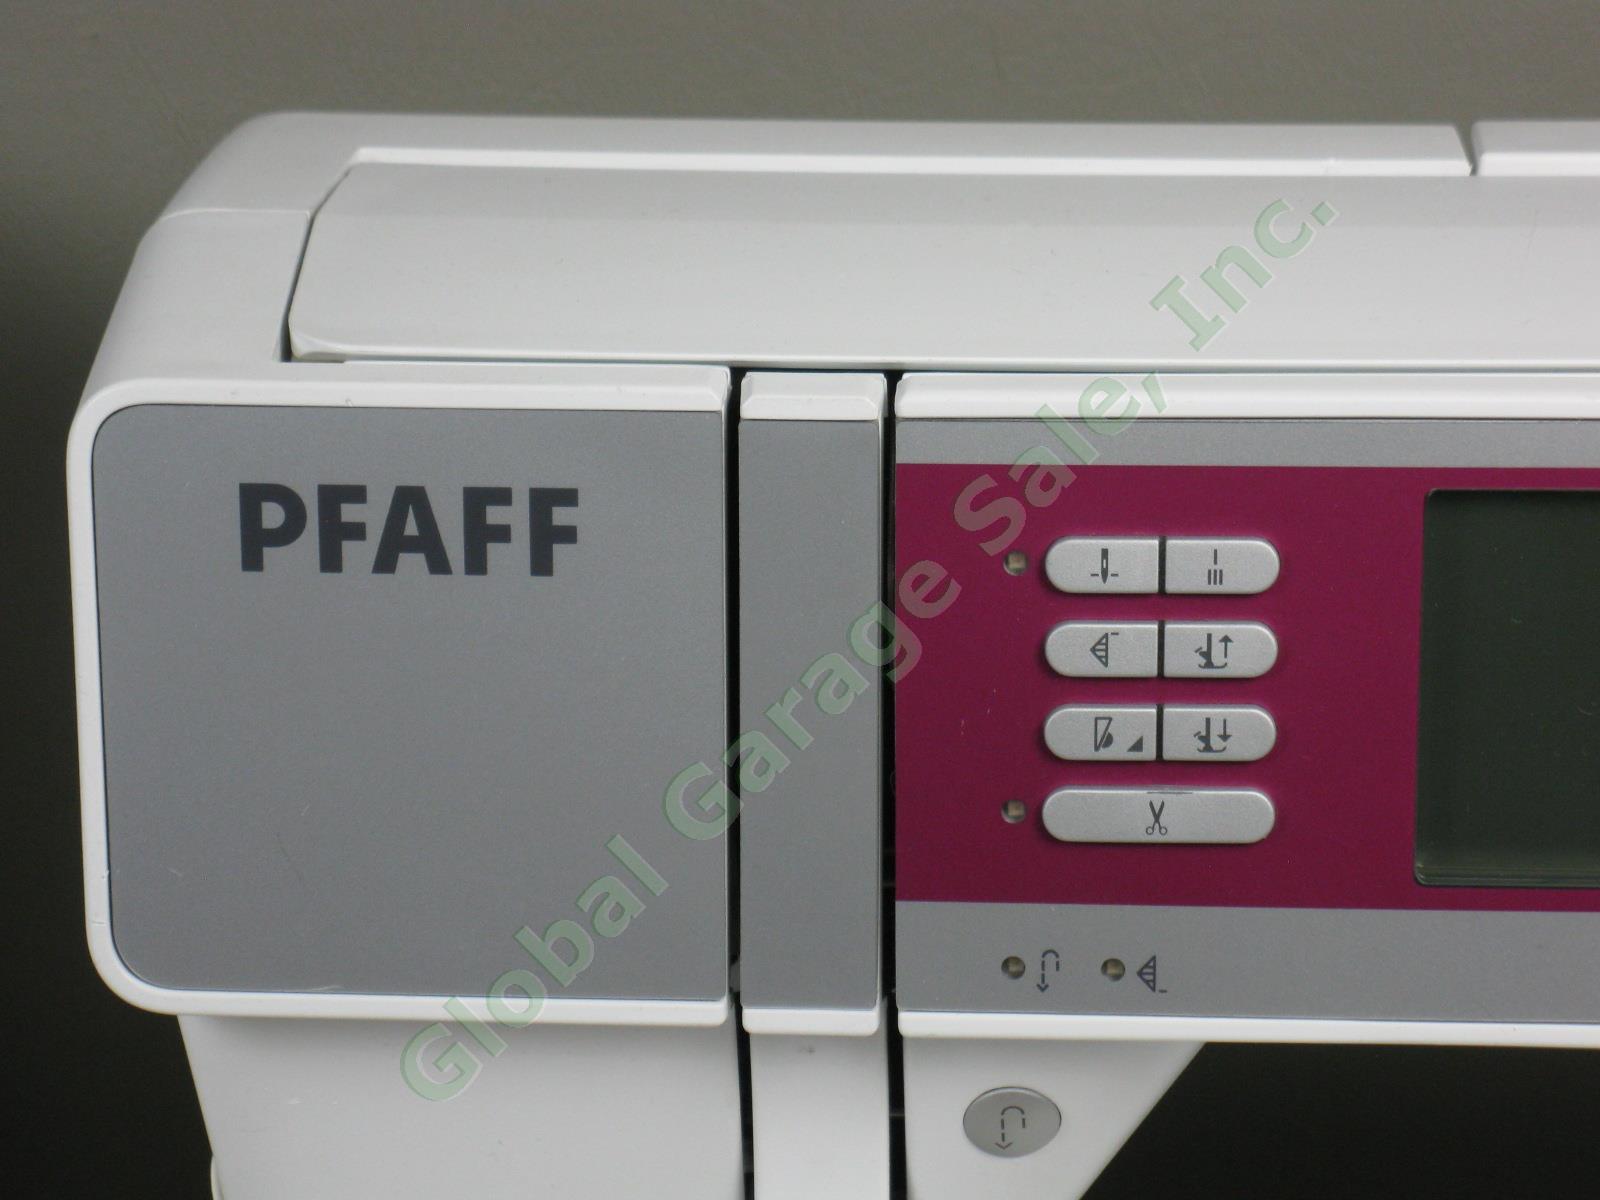 Pfaff Quilt Expression 4.0 Sewing Machine One Owner! Just Serviced! No Reserve! 4